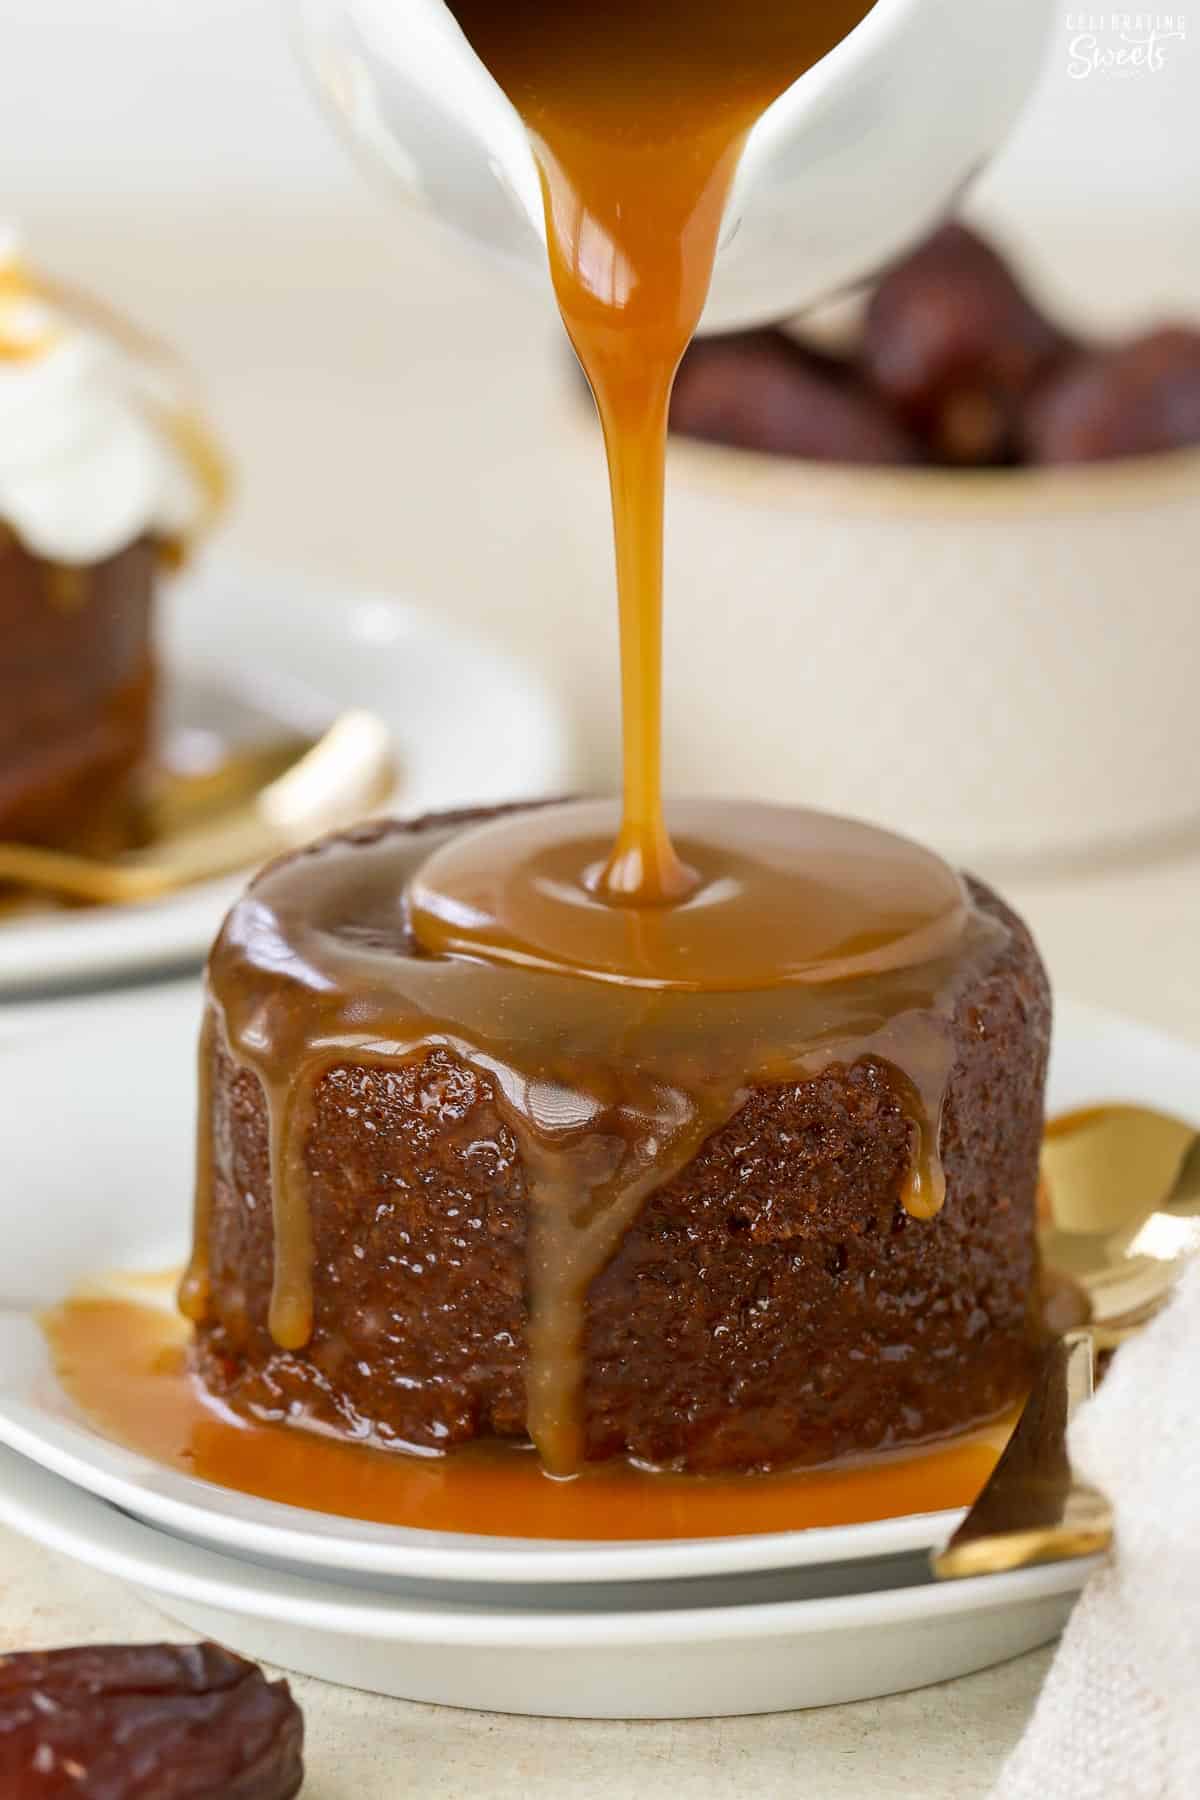 Toffee sauce being poured on sticky toffee pudding.